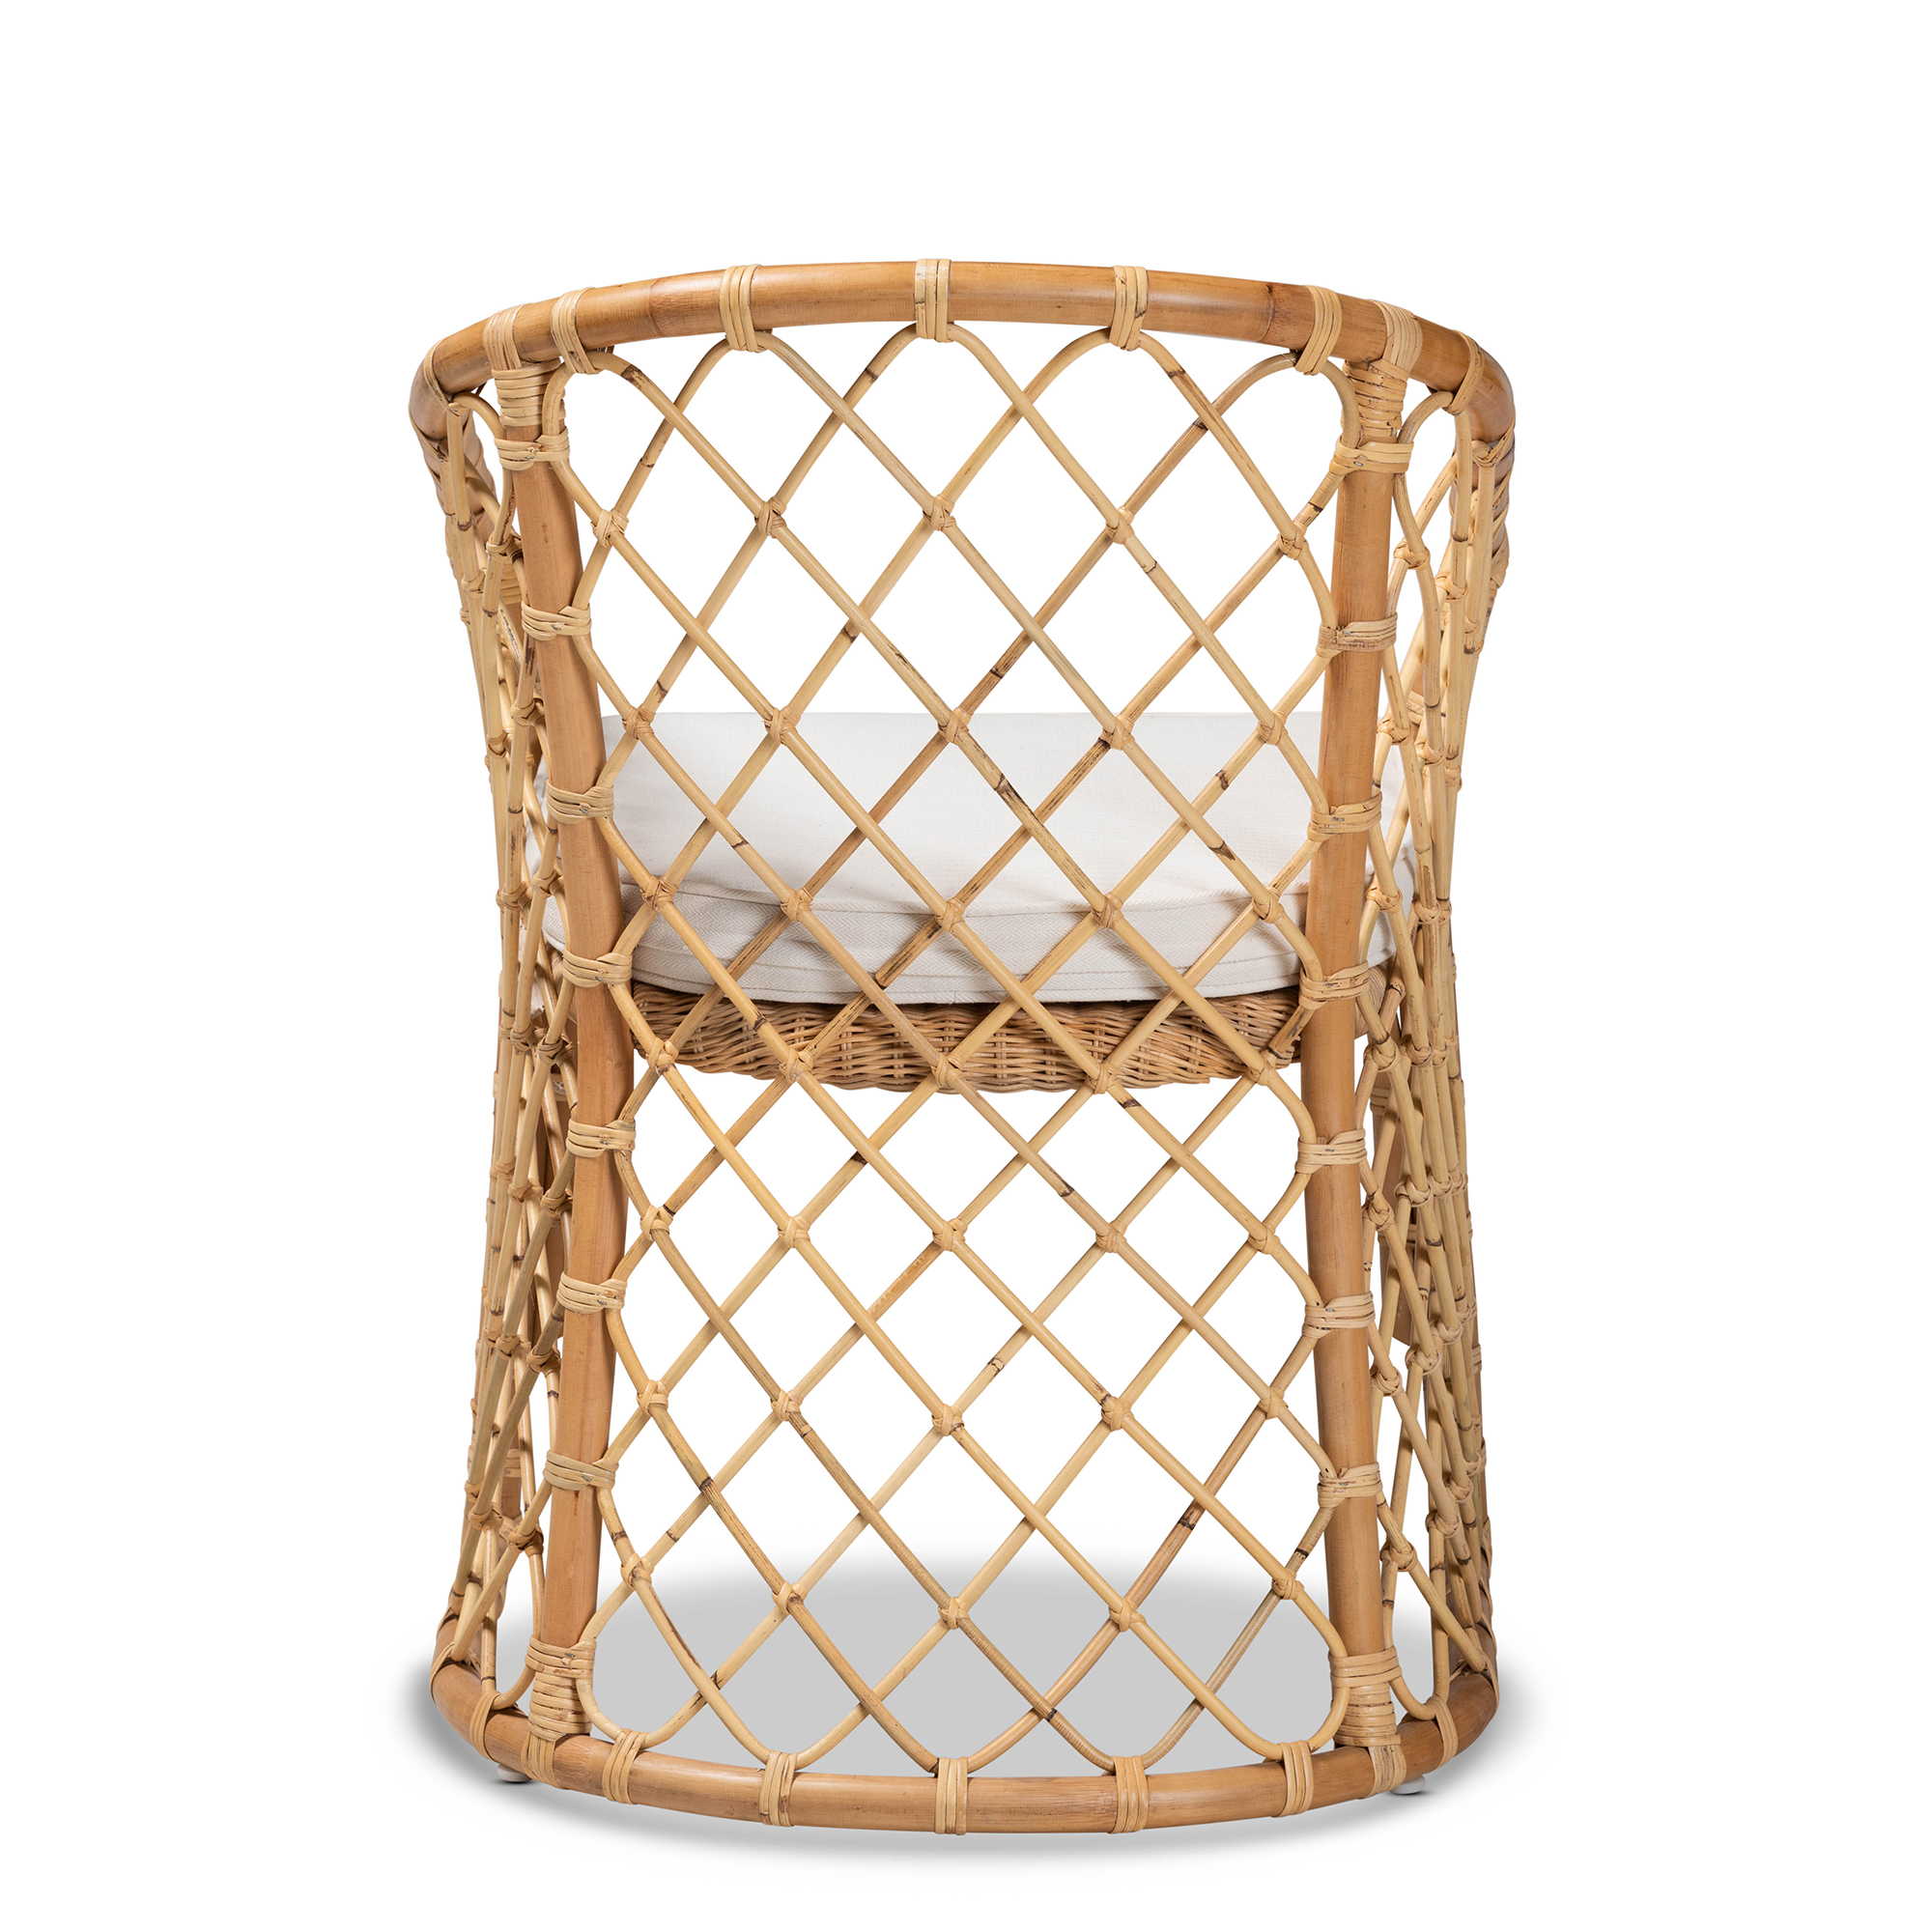 bali & pari Orchard Modern Bohemian White Fabric Upholstered and Natural Brown Rattan Dining Chair - image 5 of 10